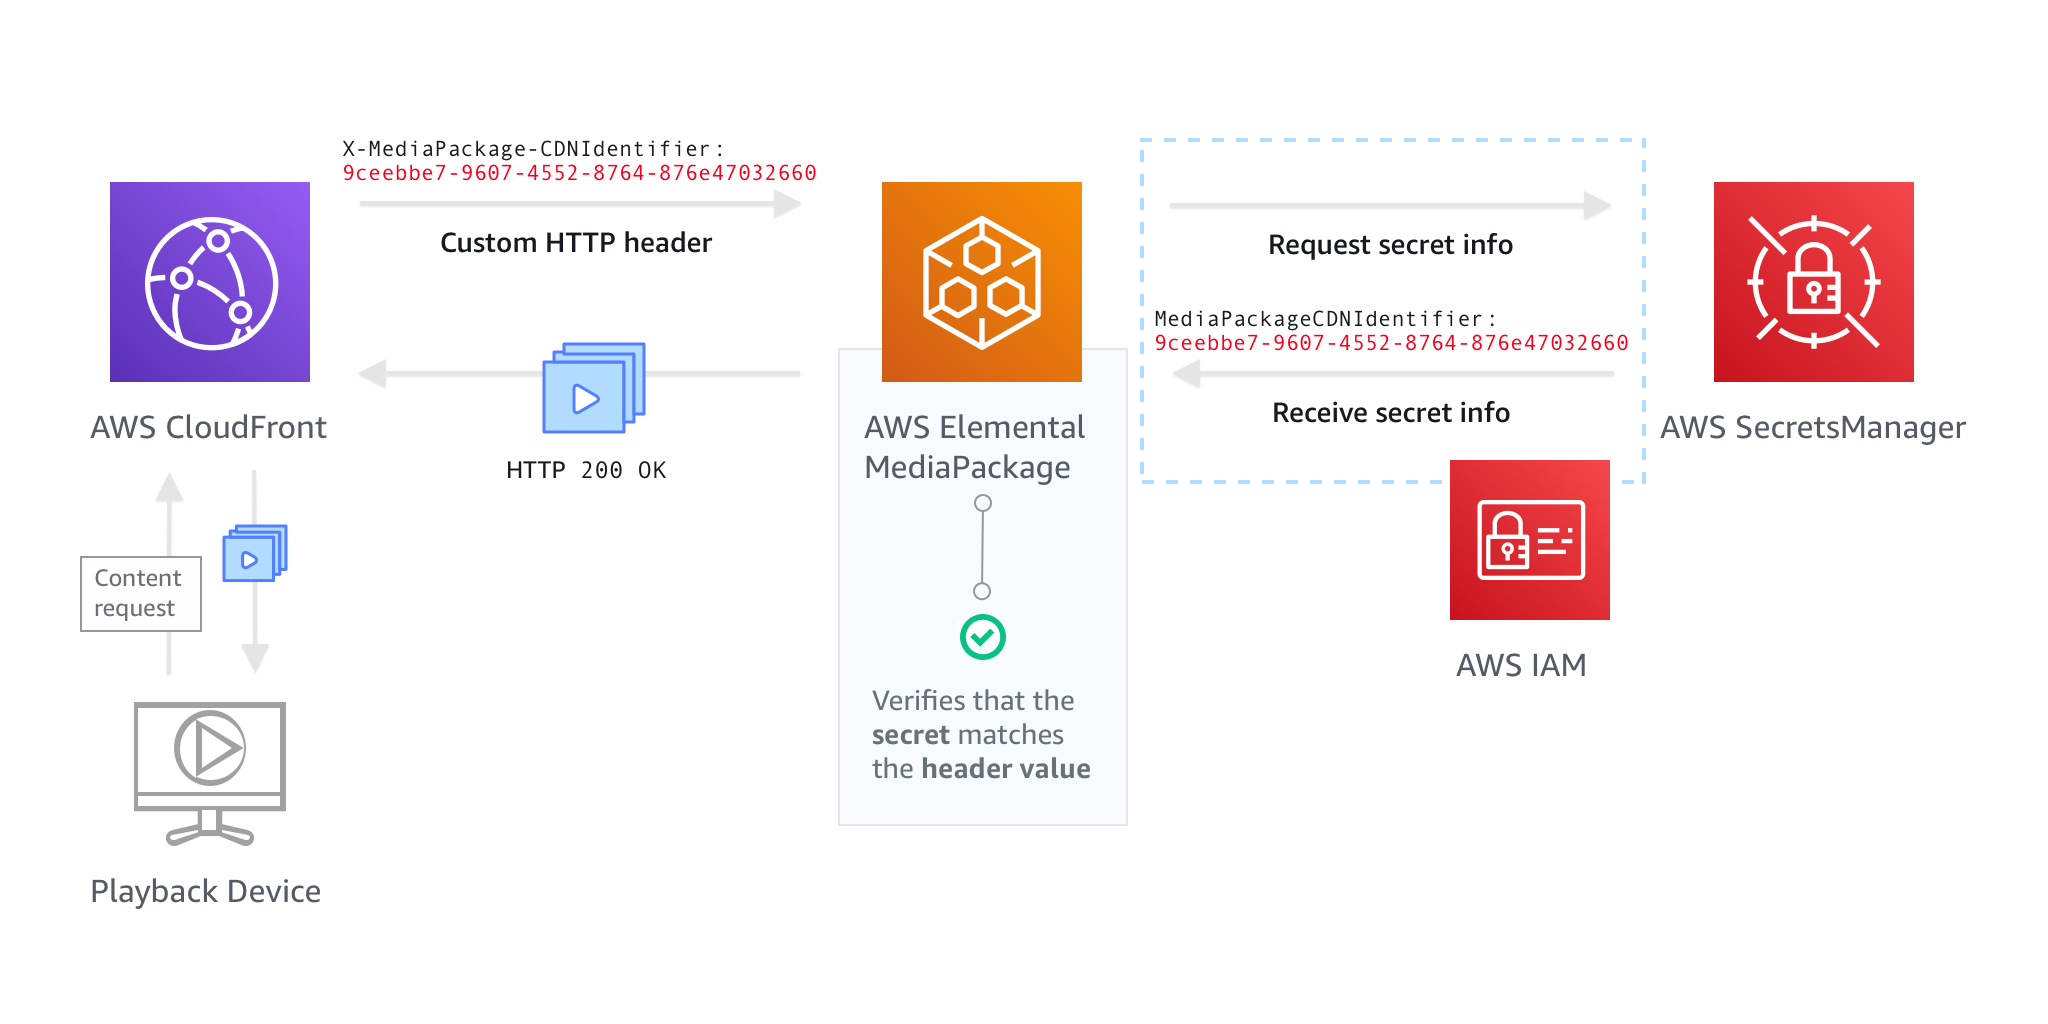 
                The image shows a successful CDN authentication flow. The bottom left shows
                    a playback device requesting content from Amazon CloudFront indicated by an arrow.
                    CloudFront includes the custom HTTP header and value in it's request to
                    MediaPackage, indicated by an arrow. MediaPackage requests the secret info from
                    AWS Secrets Manager, indicated by an arrow, which is dependent on permission from
                    IAM. AWS Secrets Manager responds with the secret value to MediaPackage.
                    MediaPackage verifies that the secret matches the header value, which is
                    indicated by a green checkbox. MediaPackage sends an HTTP 200 OK status code
                    along with video content to CloudFront. CloudFront serves the video content to
                    the playback device.
            